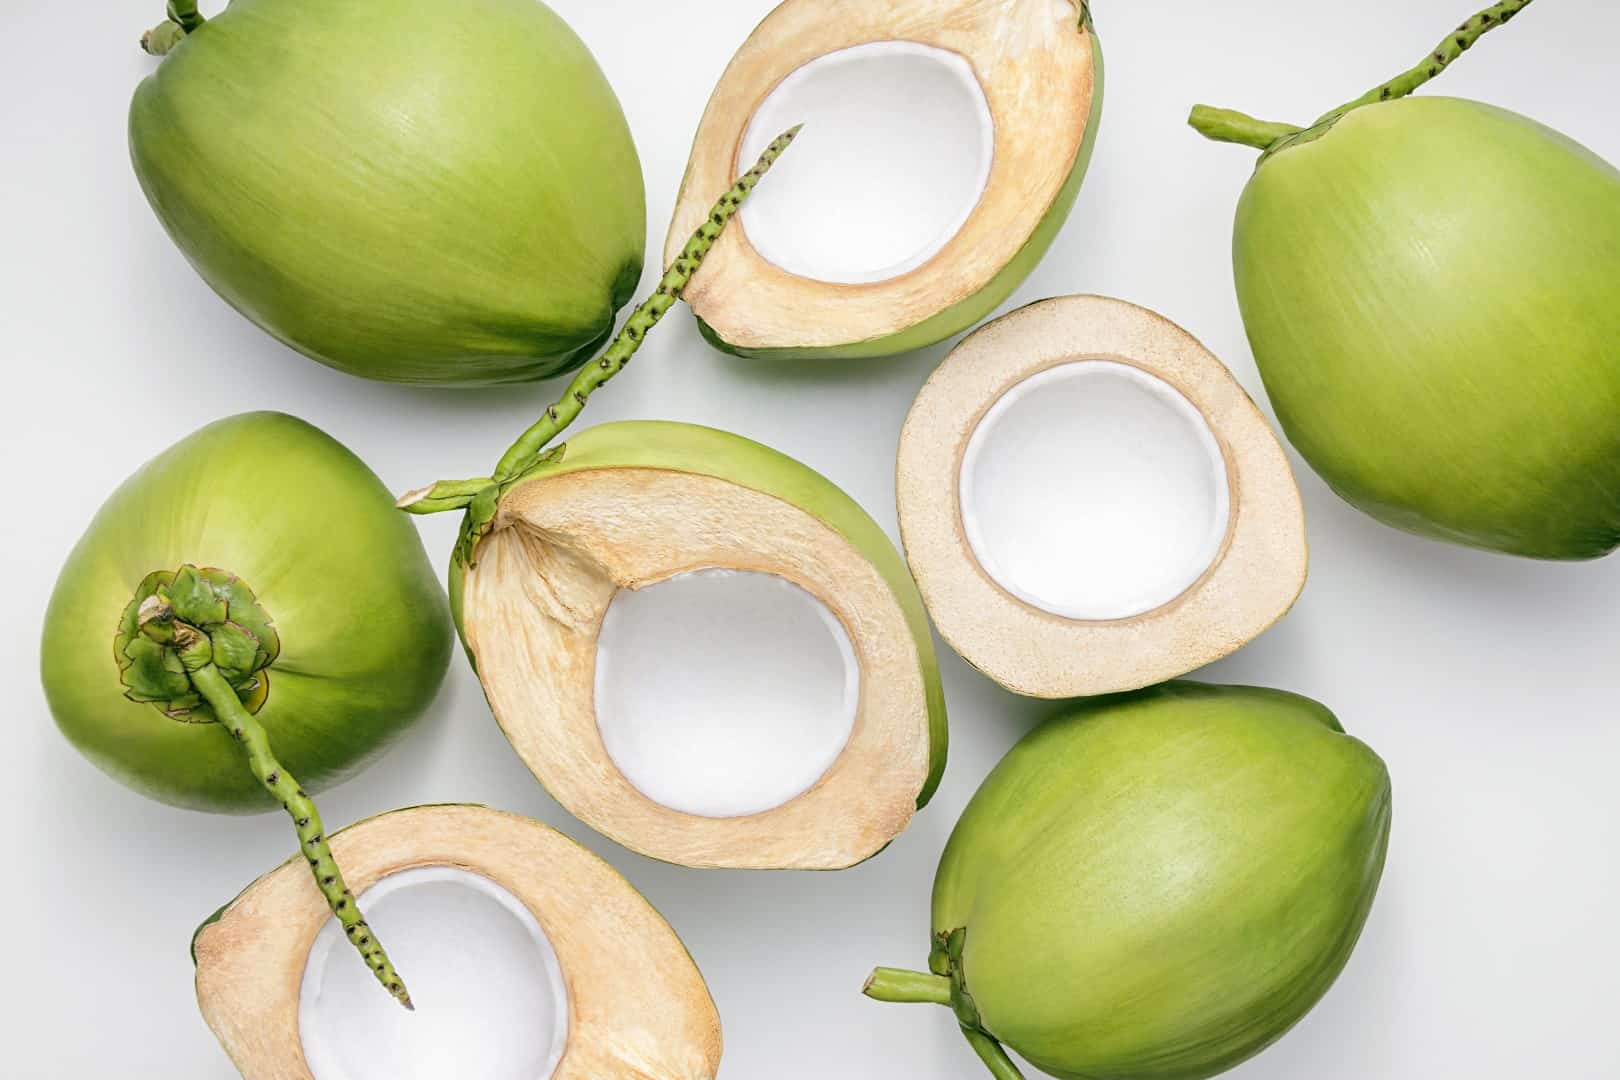 https://recipes.net/wp-content/uploads/2024/01/how-to-eat-a-whole-young-coconut-1706146605.jpg